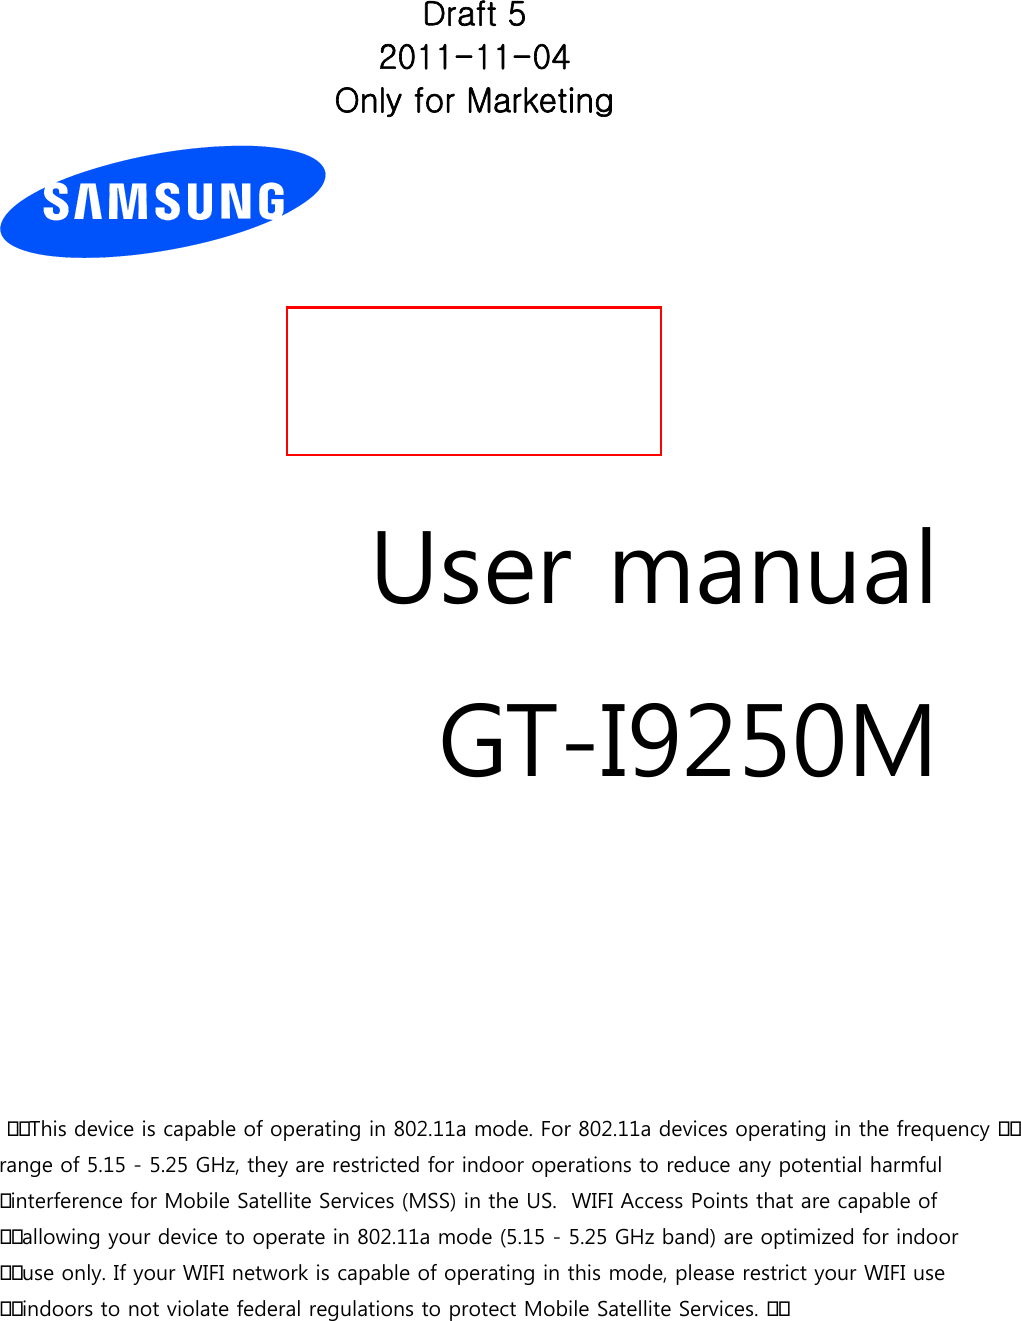          User manual GT-I9250M          This device is capable of operating in 802.11a mode. For 802.11a devices operating in the frequency range of 5.15 - 5.25 GHz, they are restricted for indoor operations to reduce any potential harmful interference for Mobile Satellite Services (MSS) in the US.  WIFI Access Points that are capable of allowing your device to operate in 802.11a mode (5.15 - 5.25 GHz band) are optimized for indoor use only. If your WIFI network is capable of operating in this mode, please restrict your WIFI use indoors to not violate federal regulations to protect Mobile Satellite Services. Draft 5 2011-11-04 Only for Marketing 